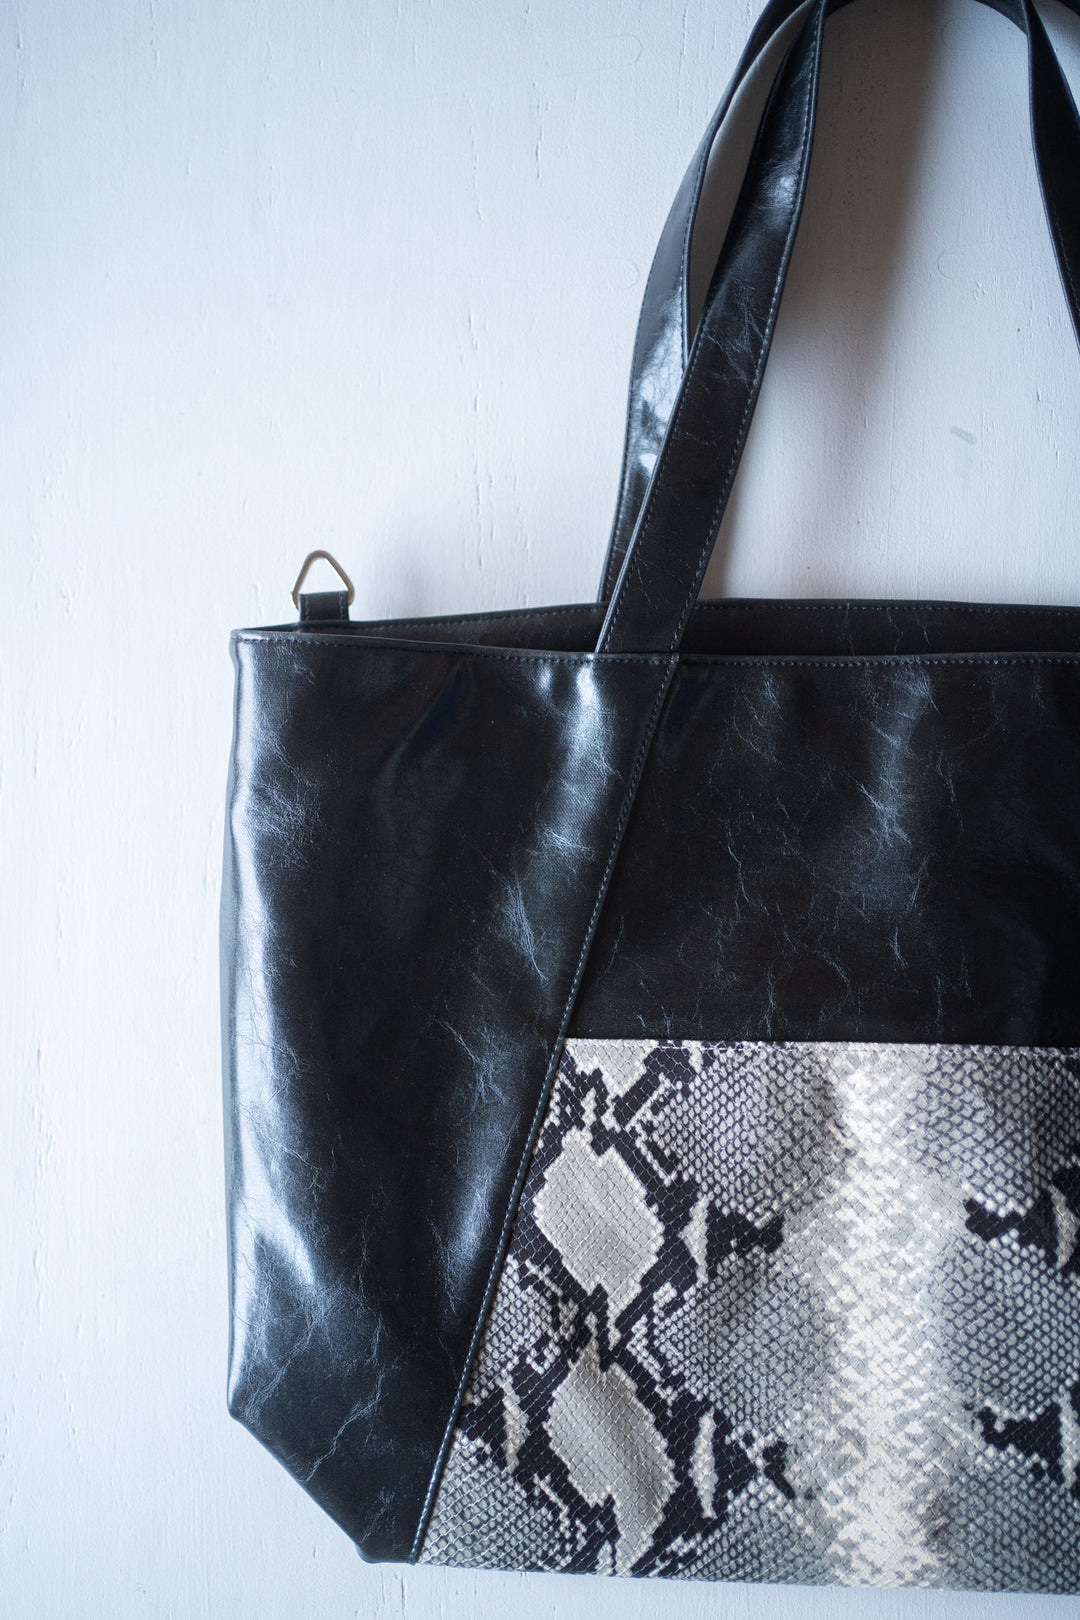 XL Troubadour Weekender Tote - Black with Python